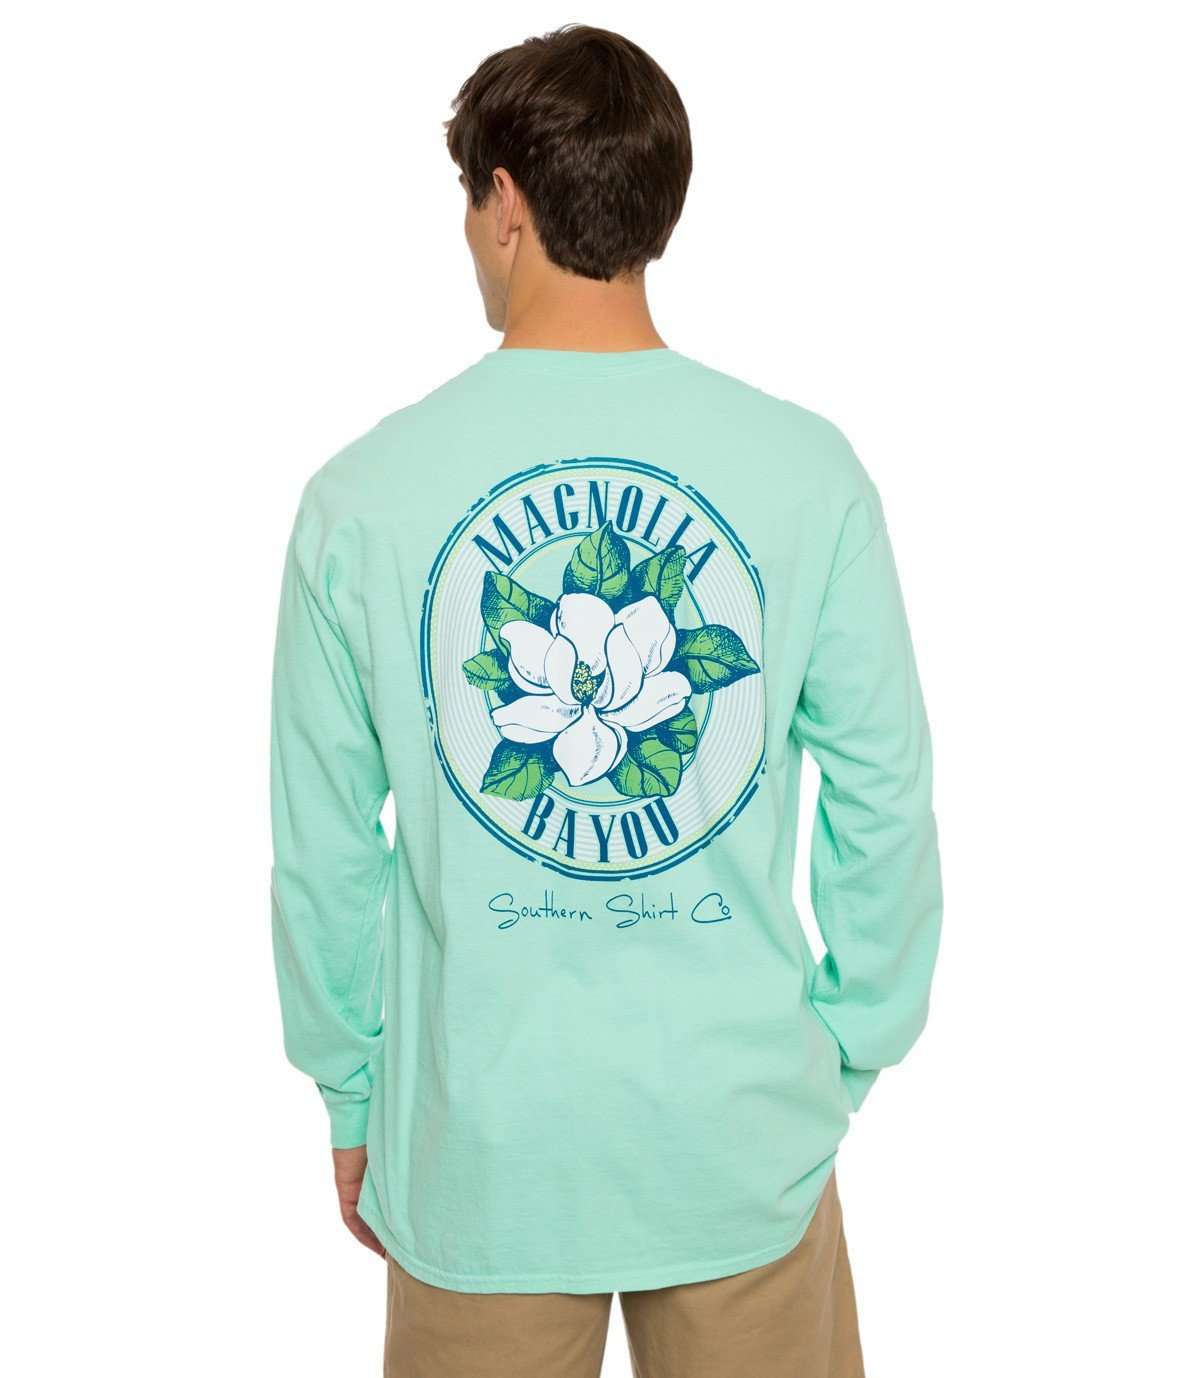 Magnolia Bayou Long Sleeve Tee in New Mint by The Southern Shirt Co. - Country Club Prep